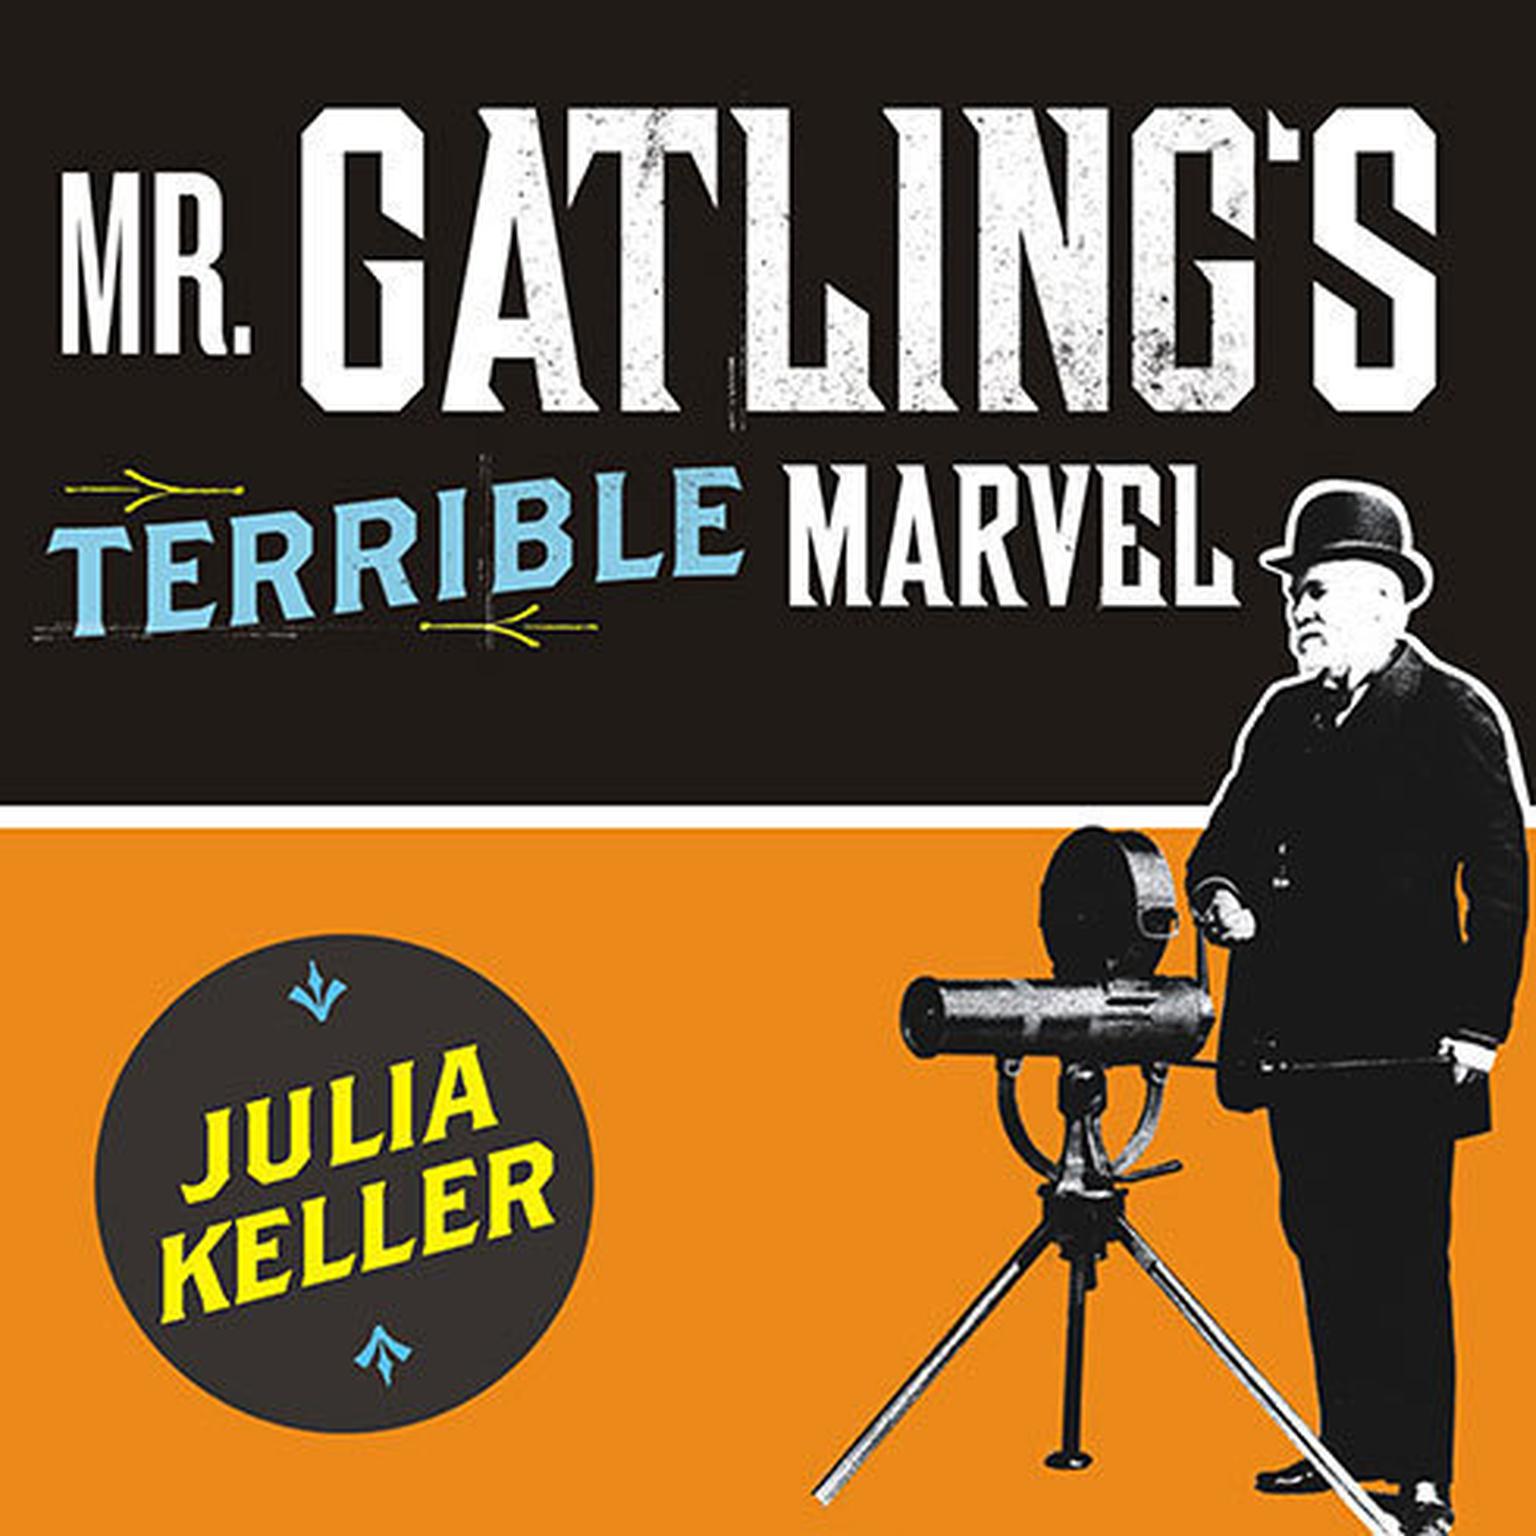 Mr. Gatlings Terrible Marvel: The Gun That Changed Everything and the Misunderstood Genius Who Invented It Audiobook, by Julia Keller